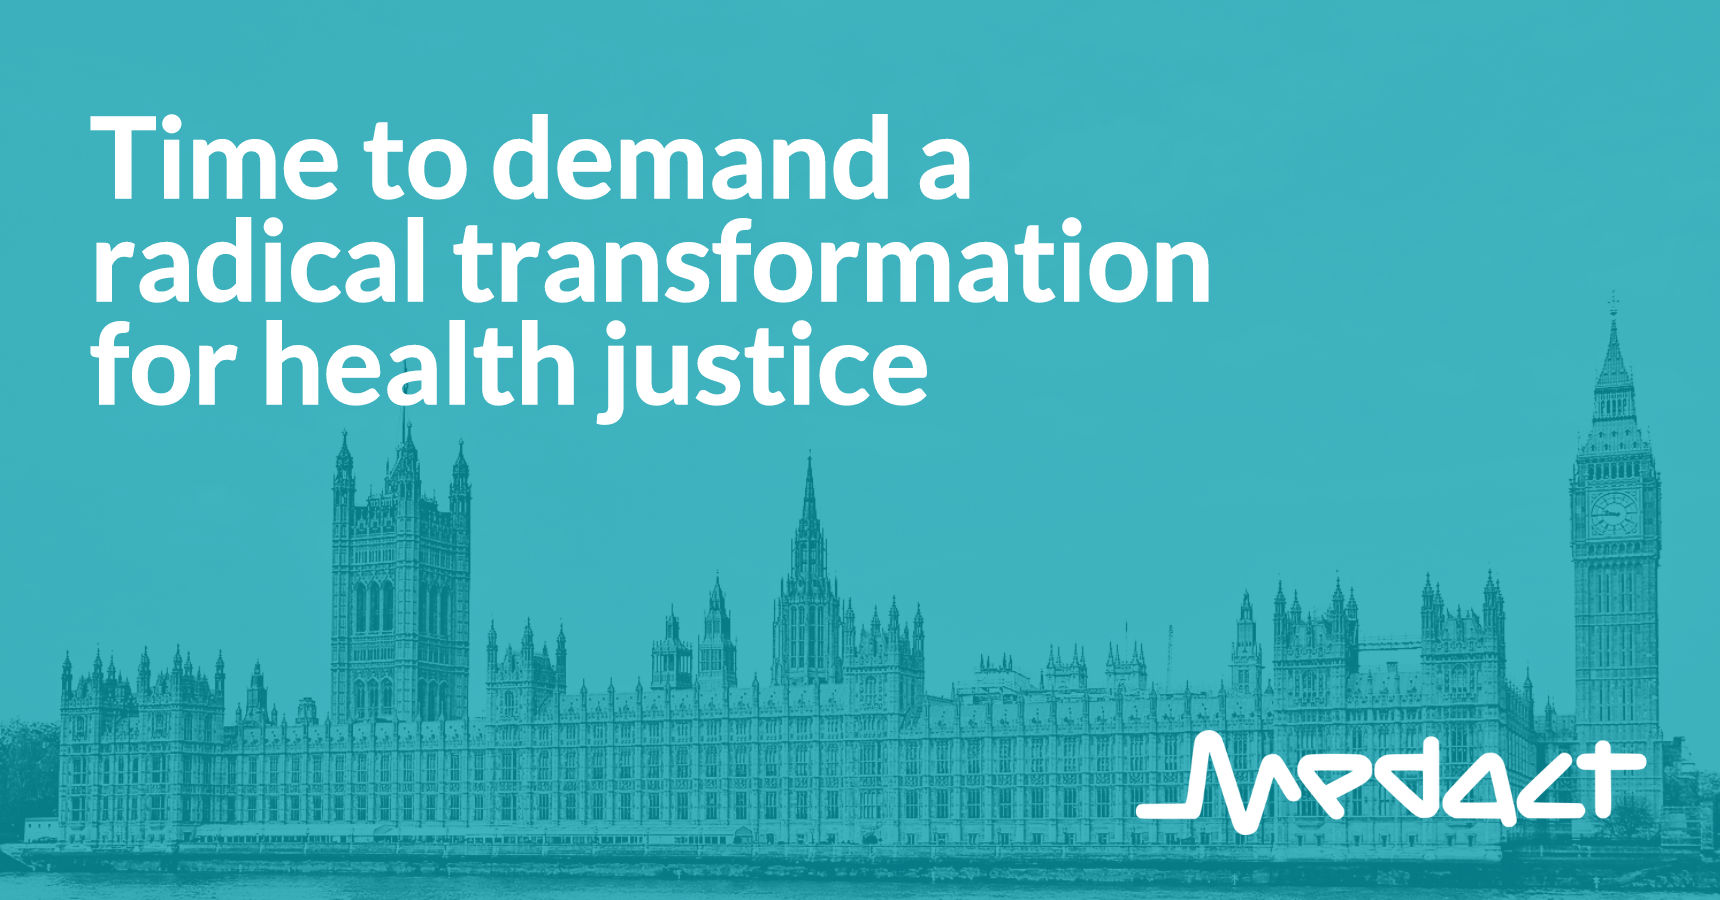 Time to demand a radical transformation for health justice